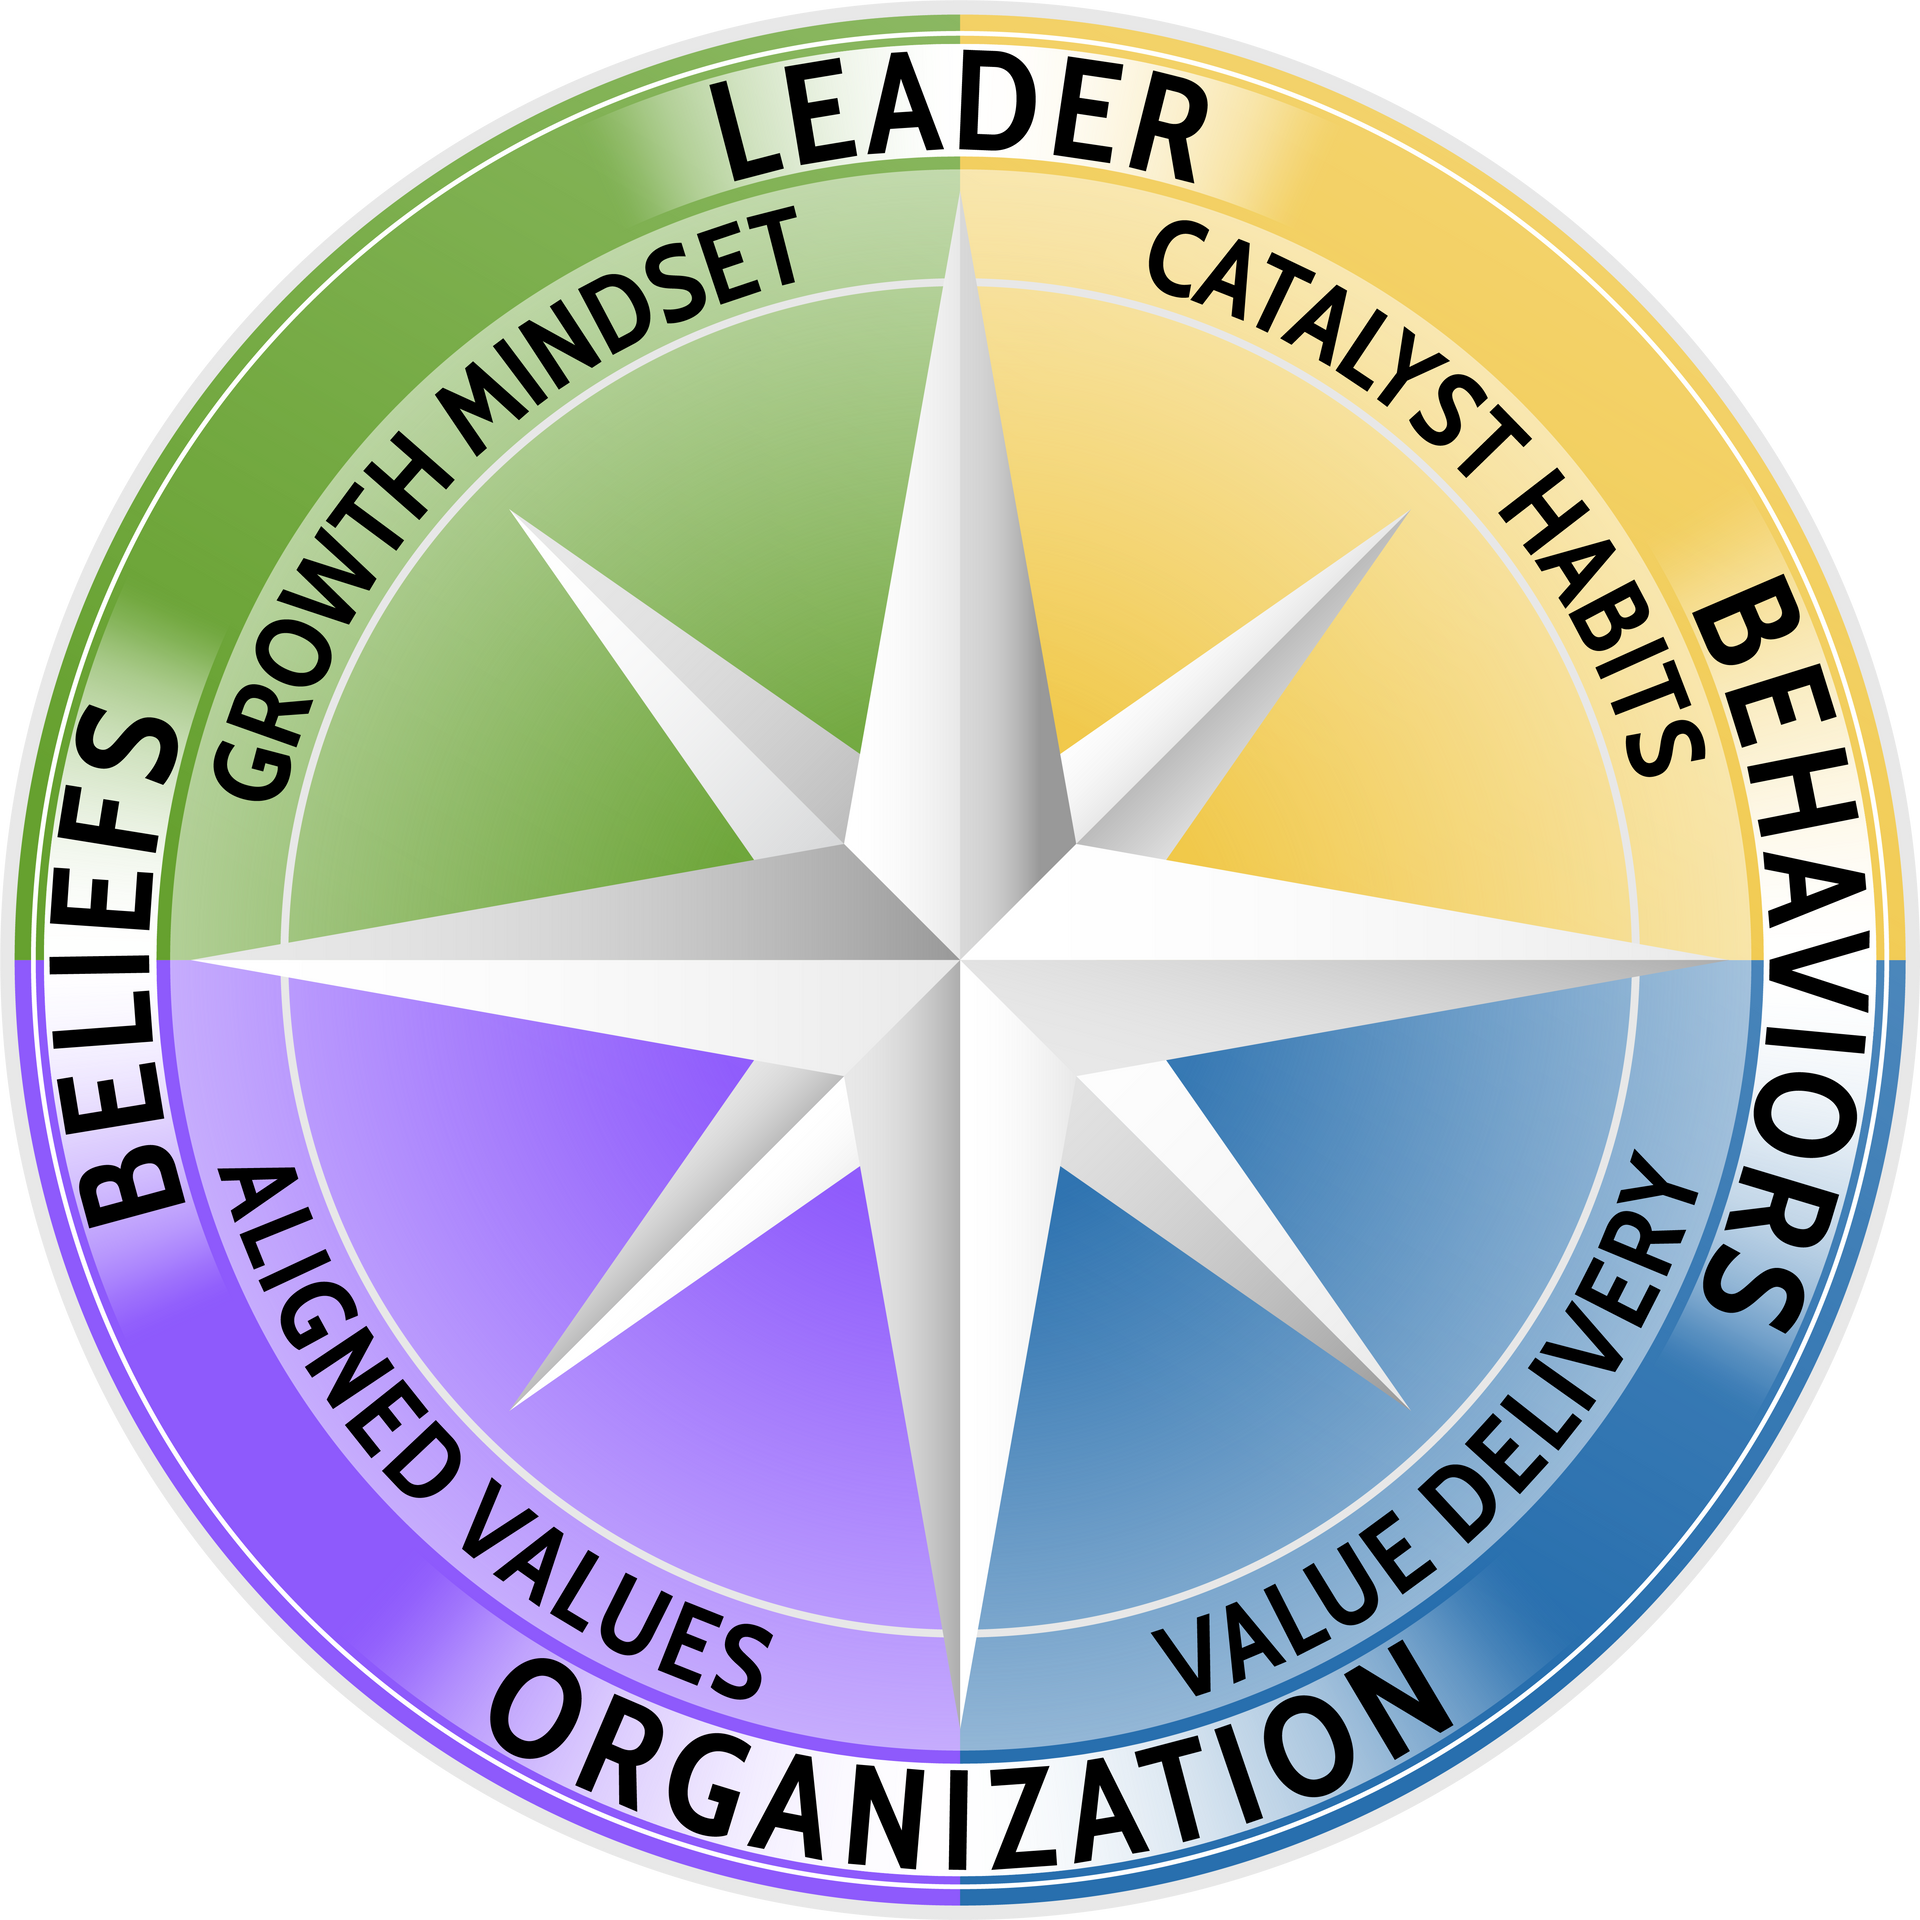 a compass with the words leader catalyst habits beliefs aligned values organization value delivery and behaviors